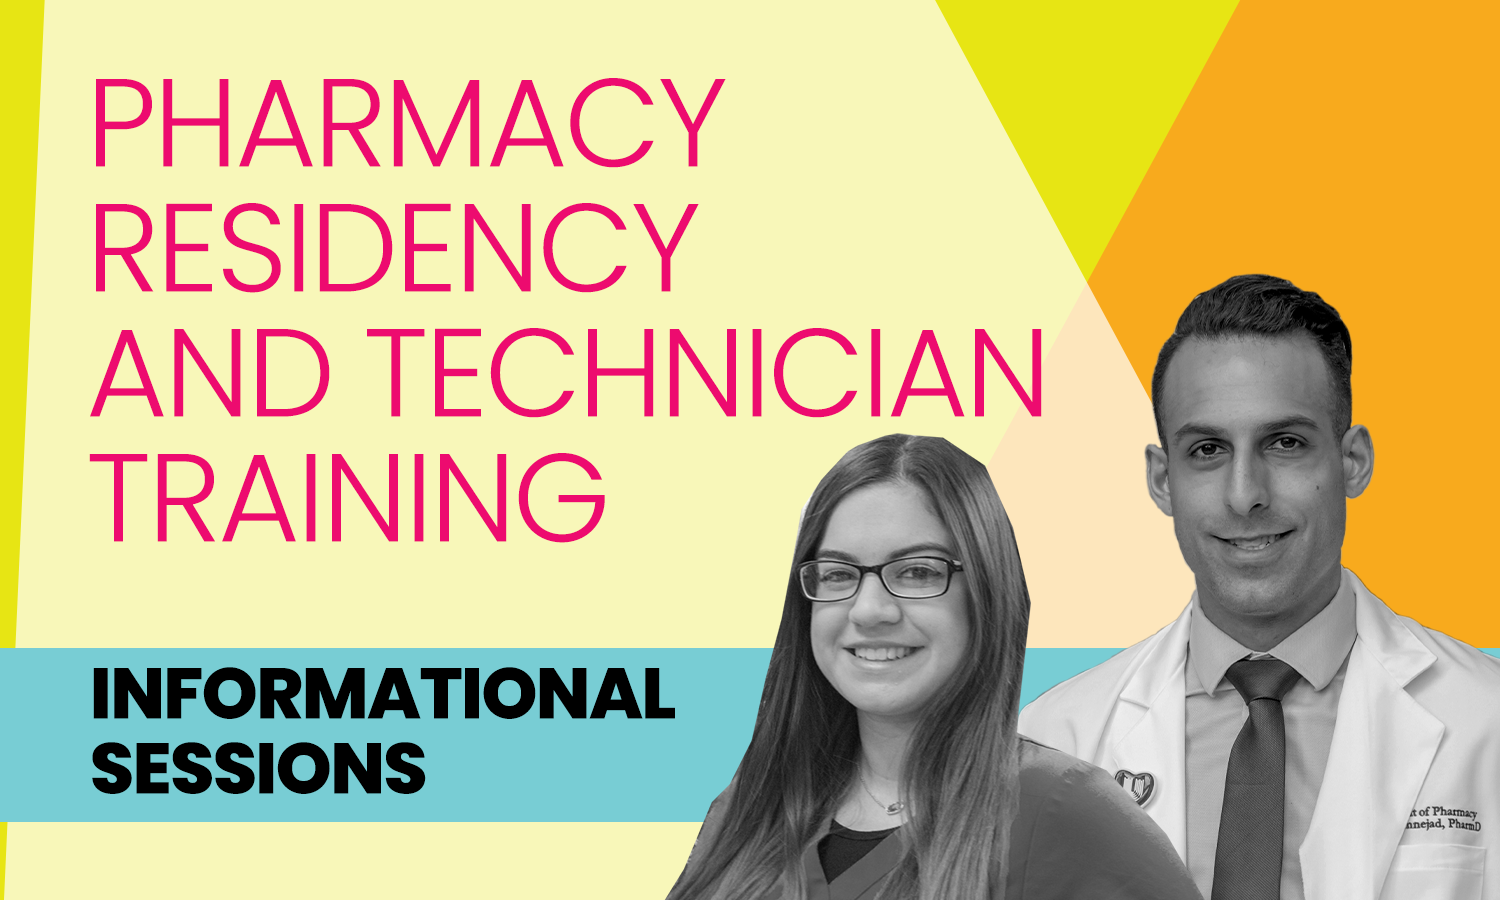 Pharmacy residency and technician training - informational sessions